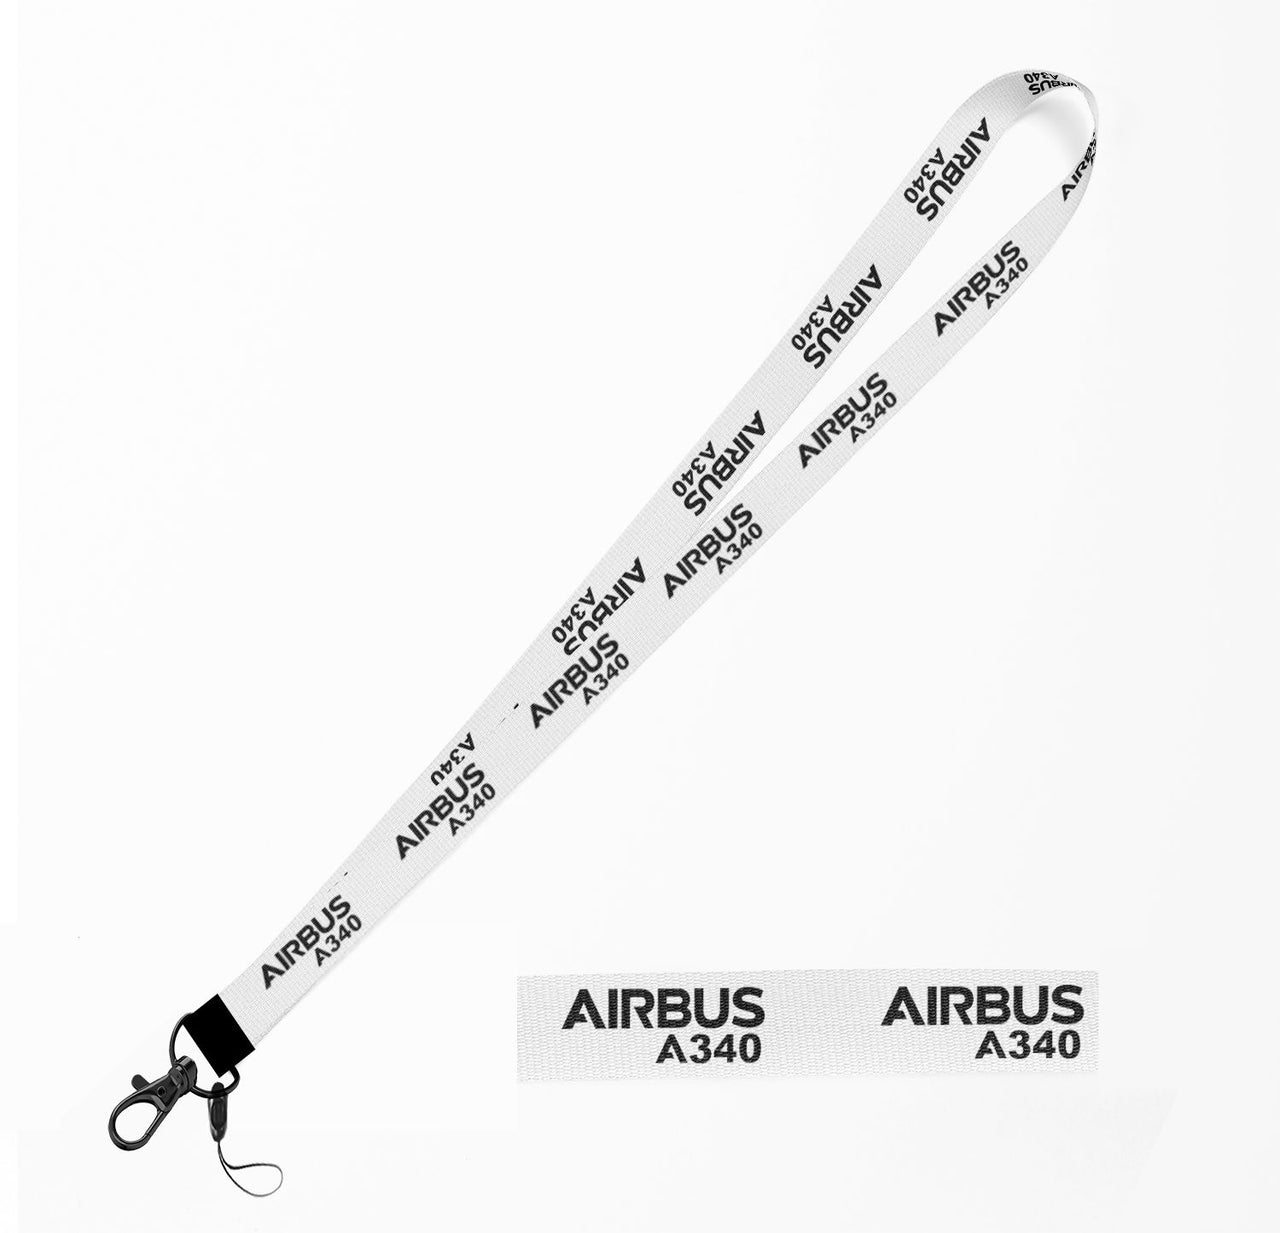 Airbus A340 & Text Designed Lanyard & ID Holders